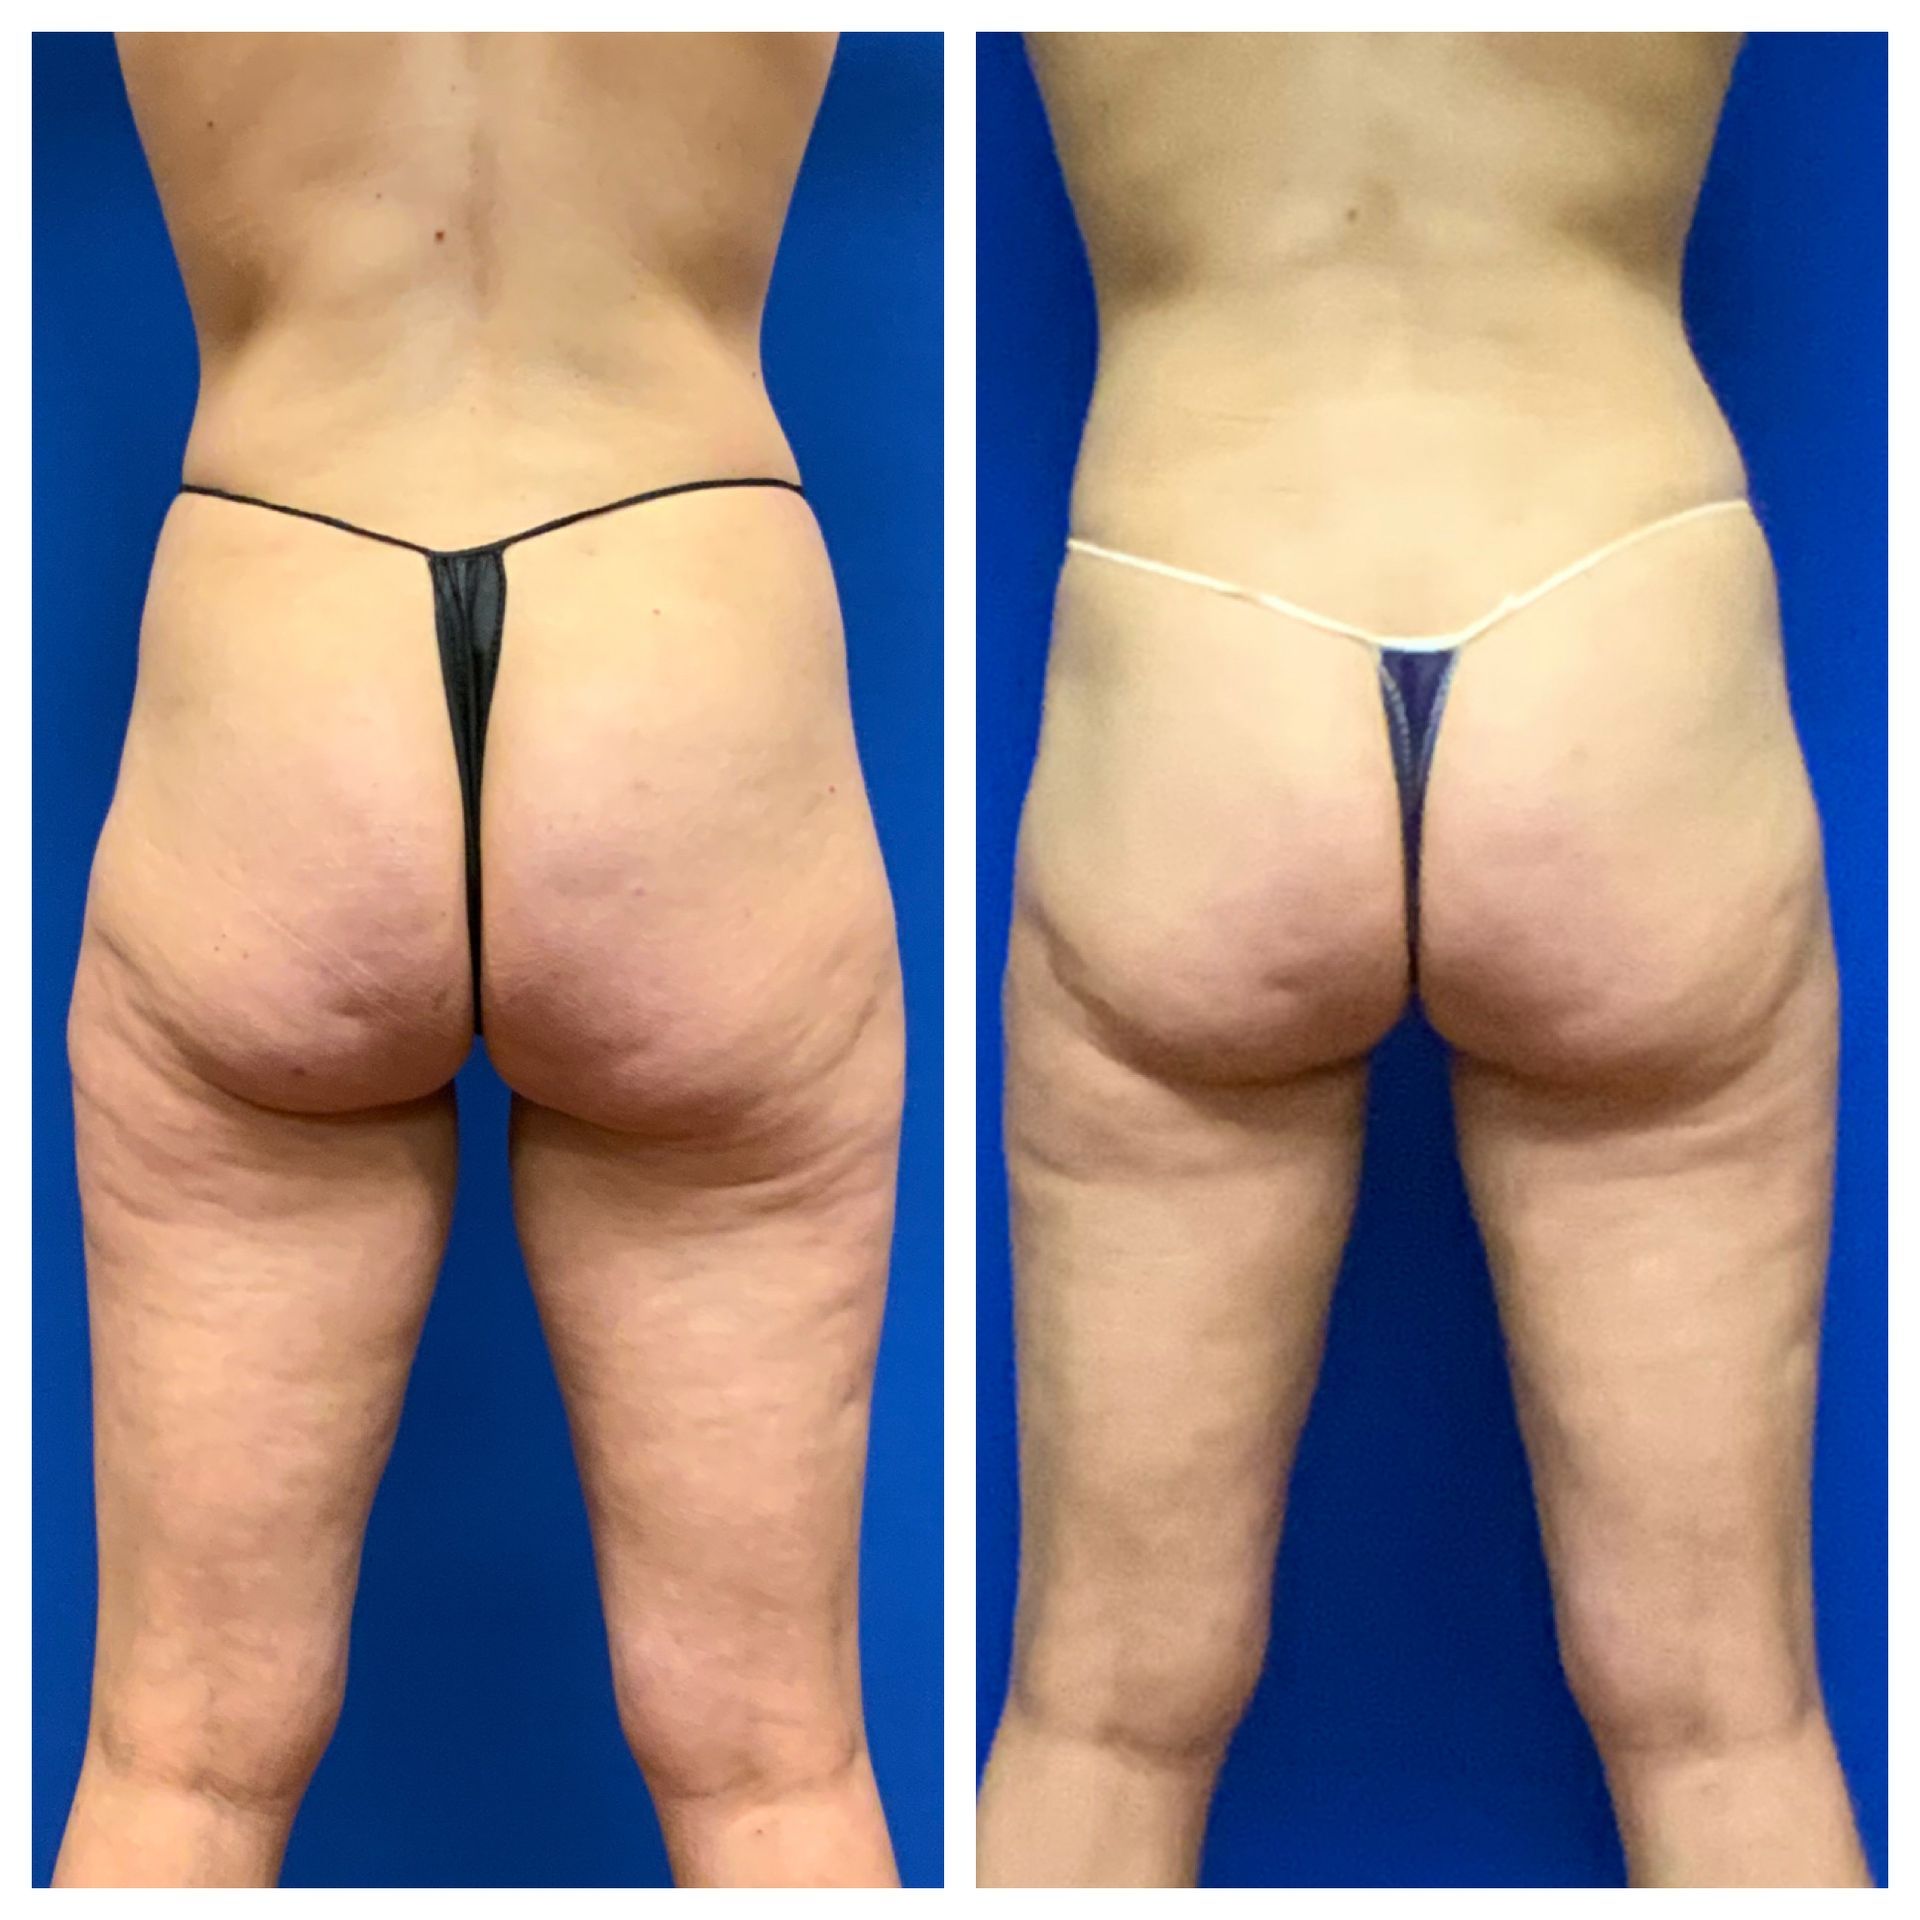 Before and After Butt Sculpting - Columbus, OH - Simply Sculpt